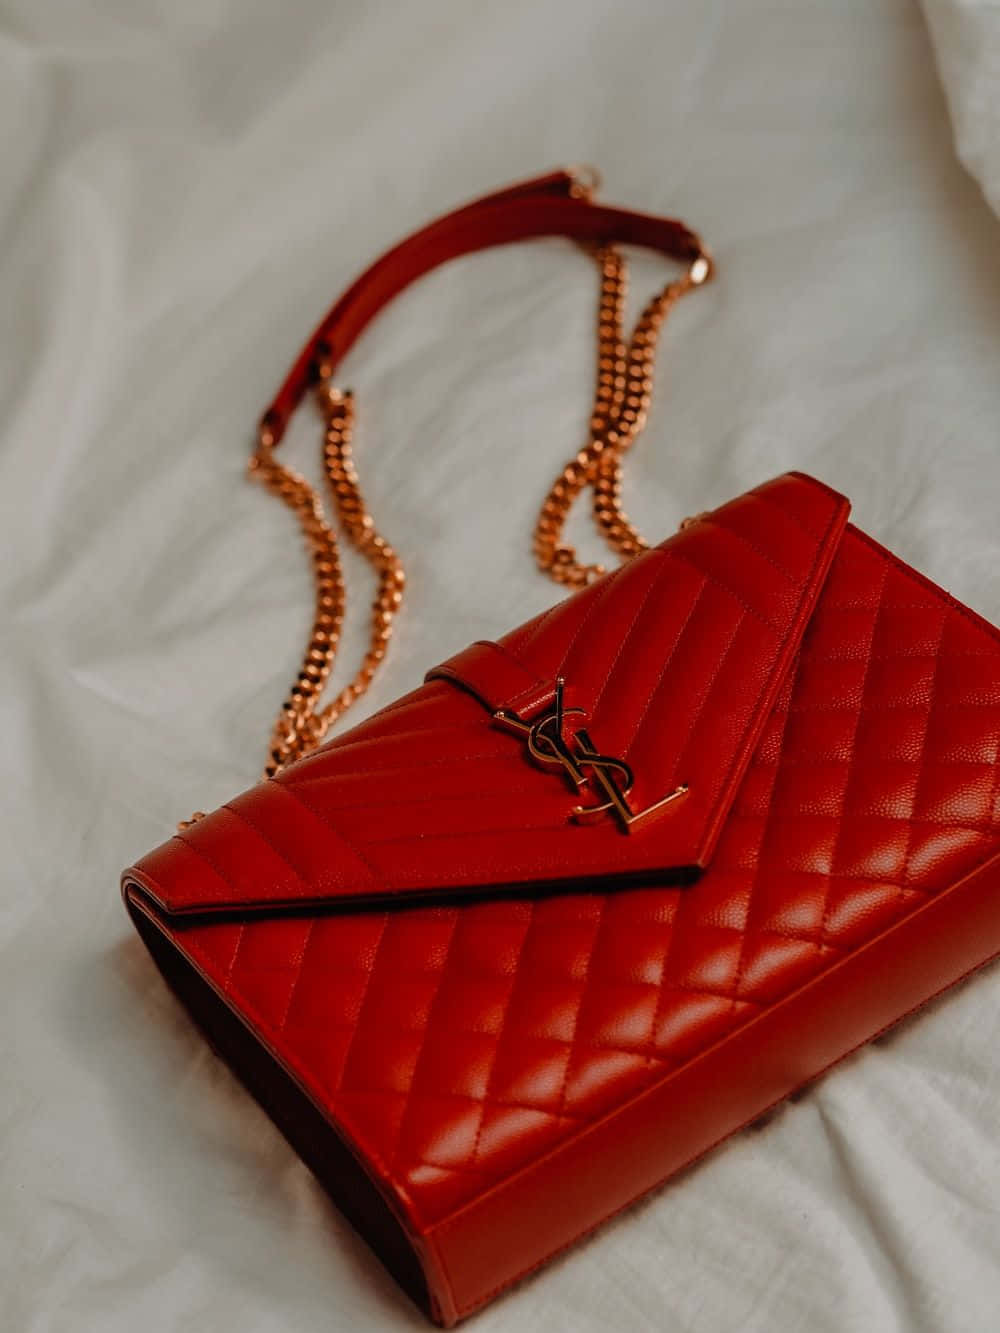 Yves Saint Laurent Red Quilted Leather Bag